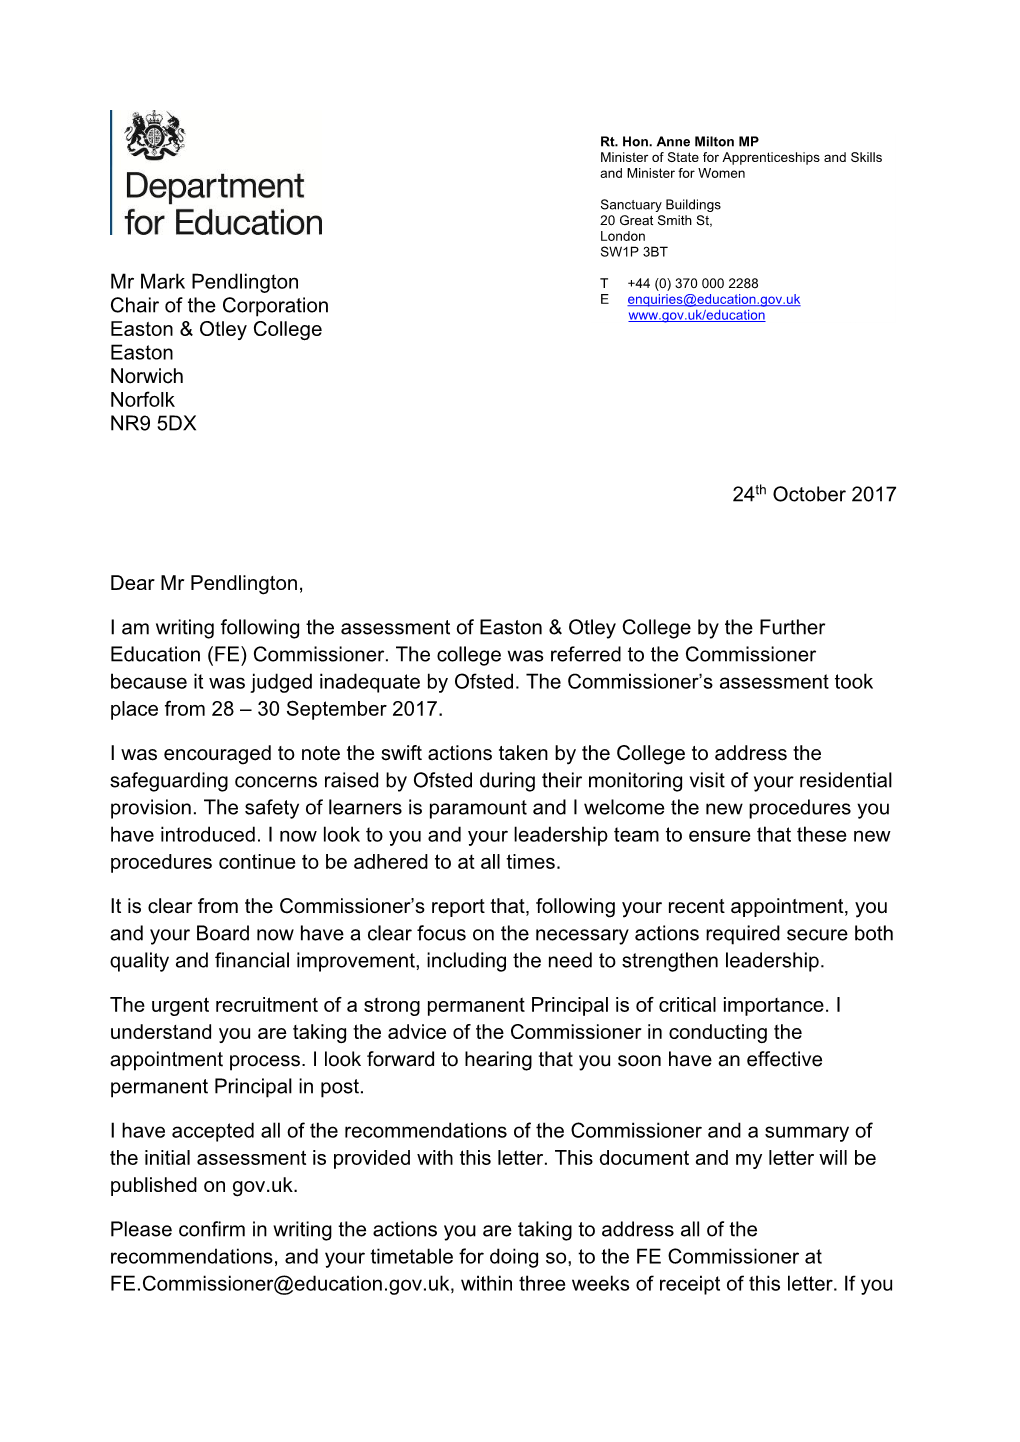 Letter from Anne Milton to Chair of Easton and Otley College